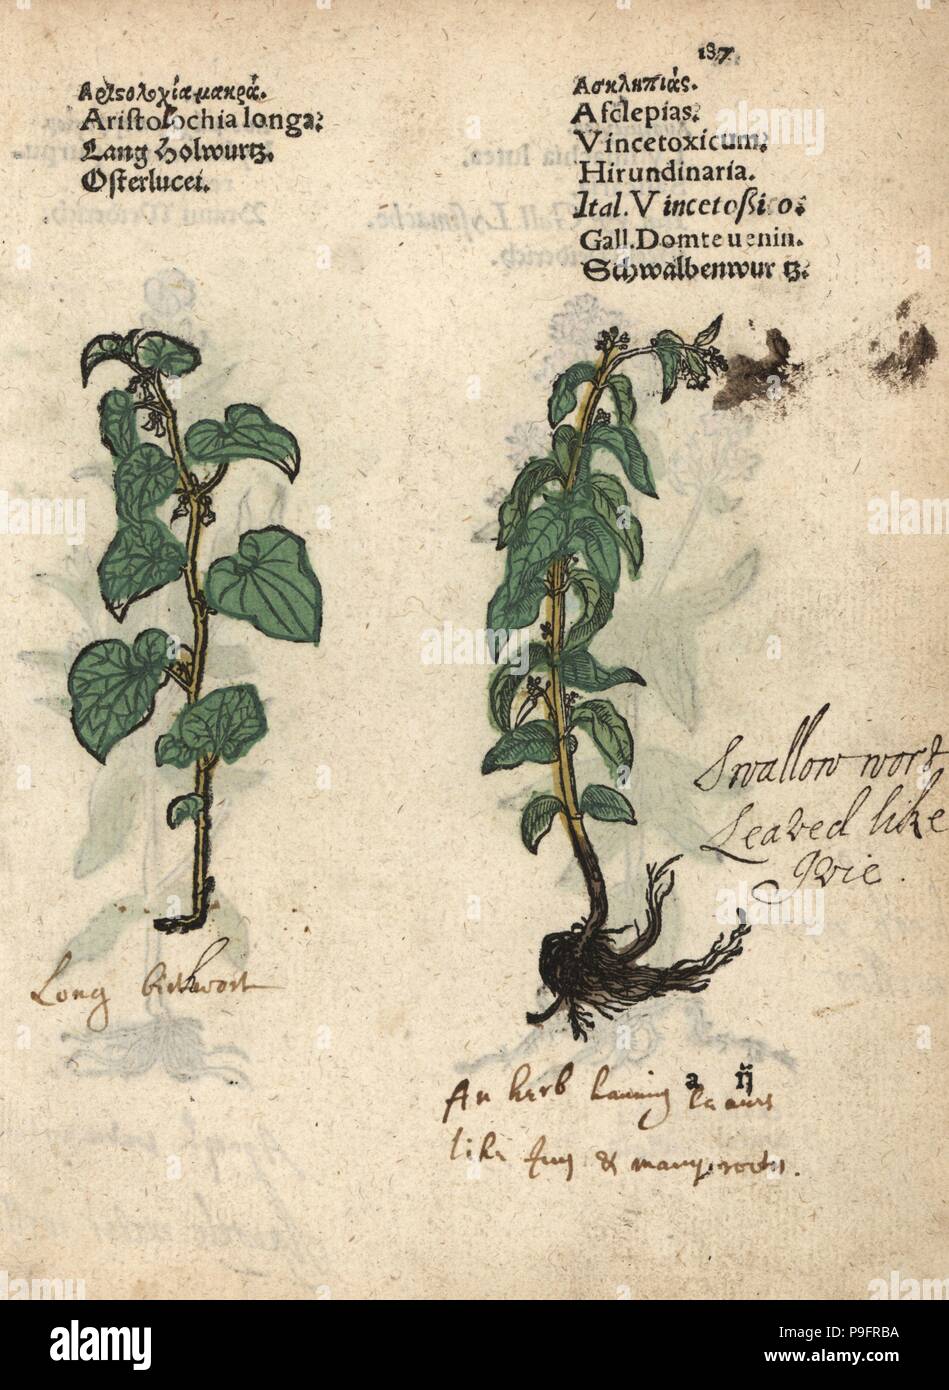 Long birthwort, Aristolochia longa, and swallow-wort, Vincetoxicum hirundinaria. Handcoloured woodblock engraving of a botanical illustration from Adam Lonicer's Krauterbuch, or Herbal, Frankfurt, 1557. This from a 17th century pirate edition or atlas of illustrations only, with captions in Latin, Greek, French, Italian, German, and in English manuscript. Stock Photo